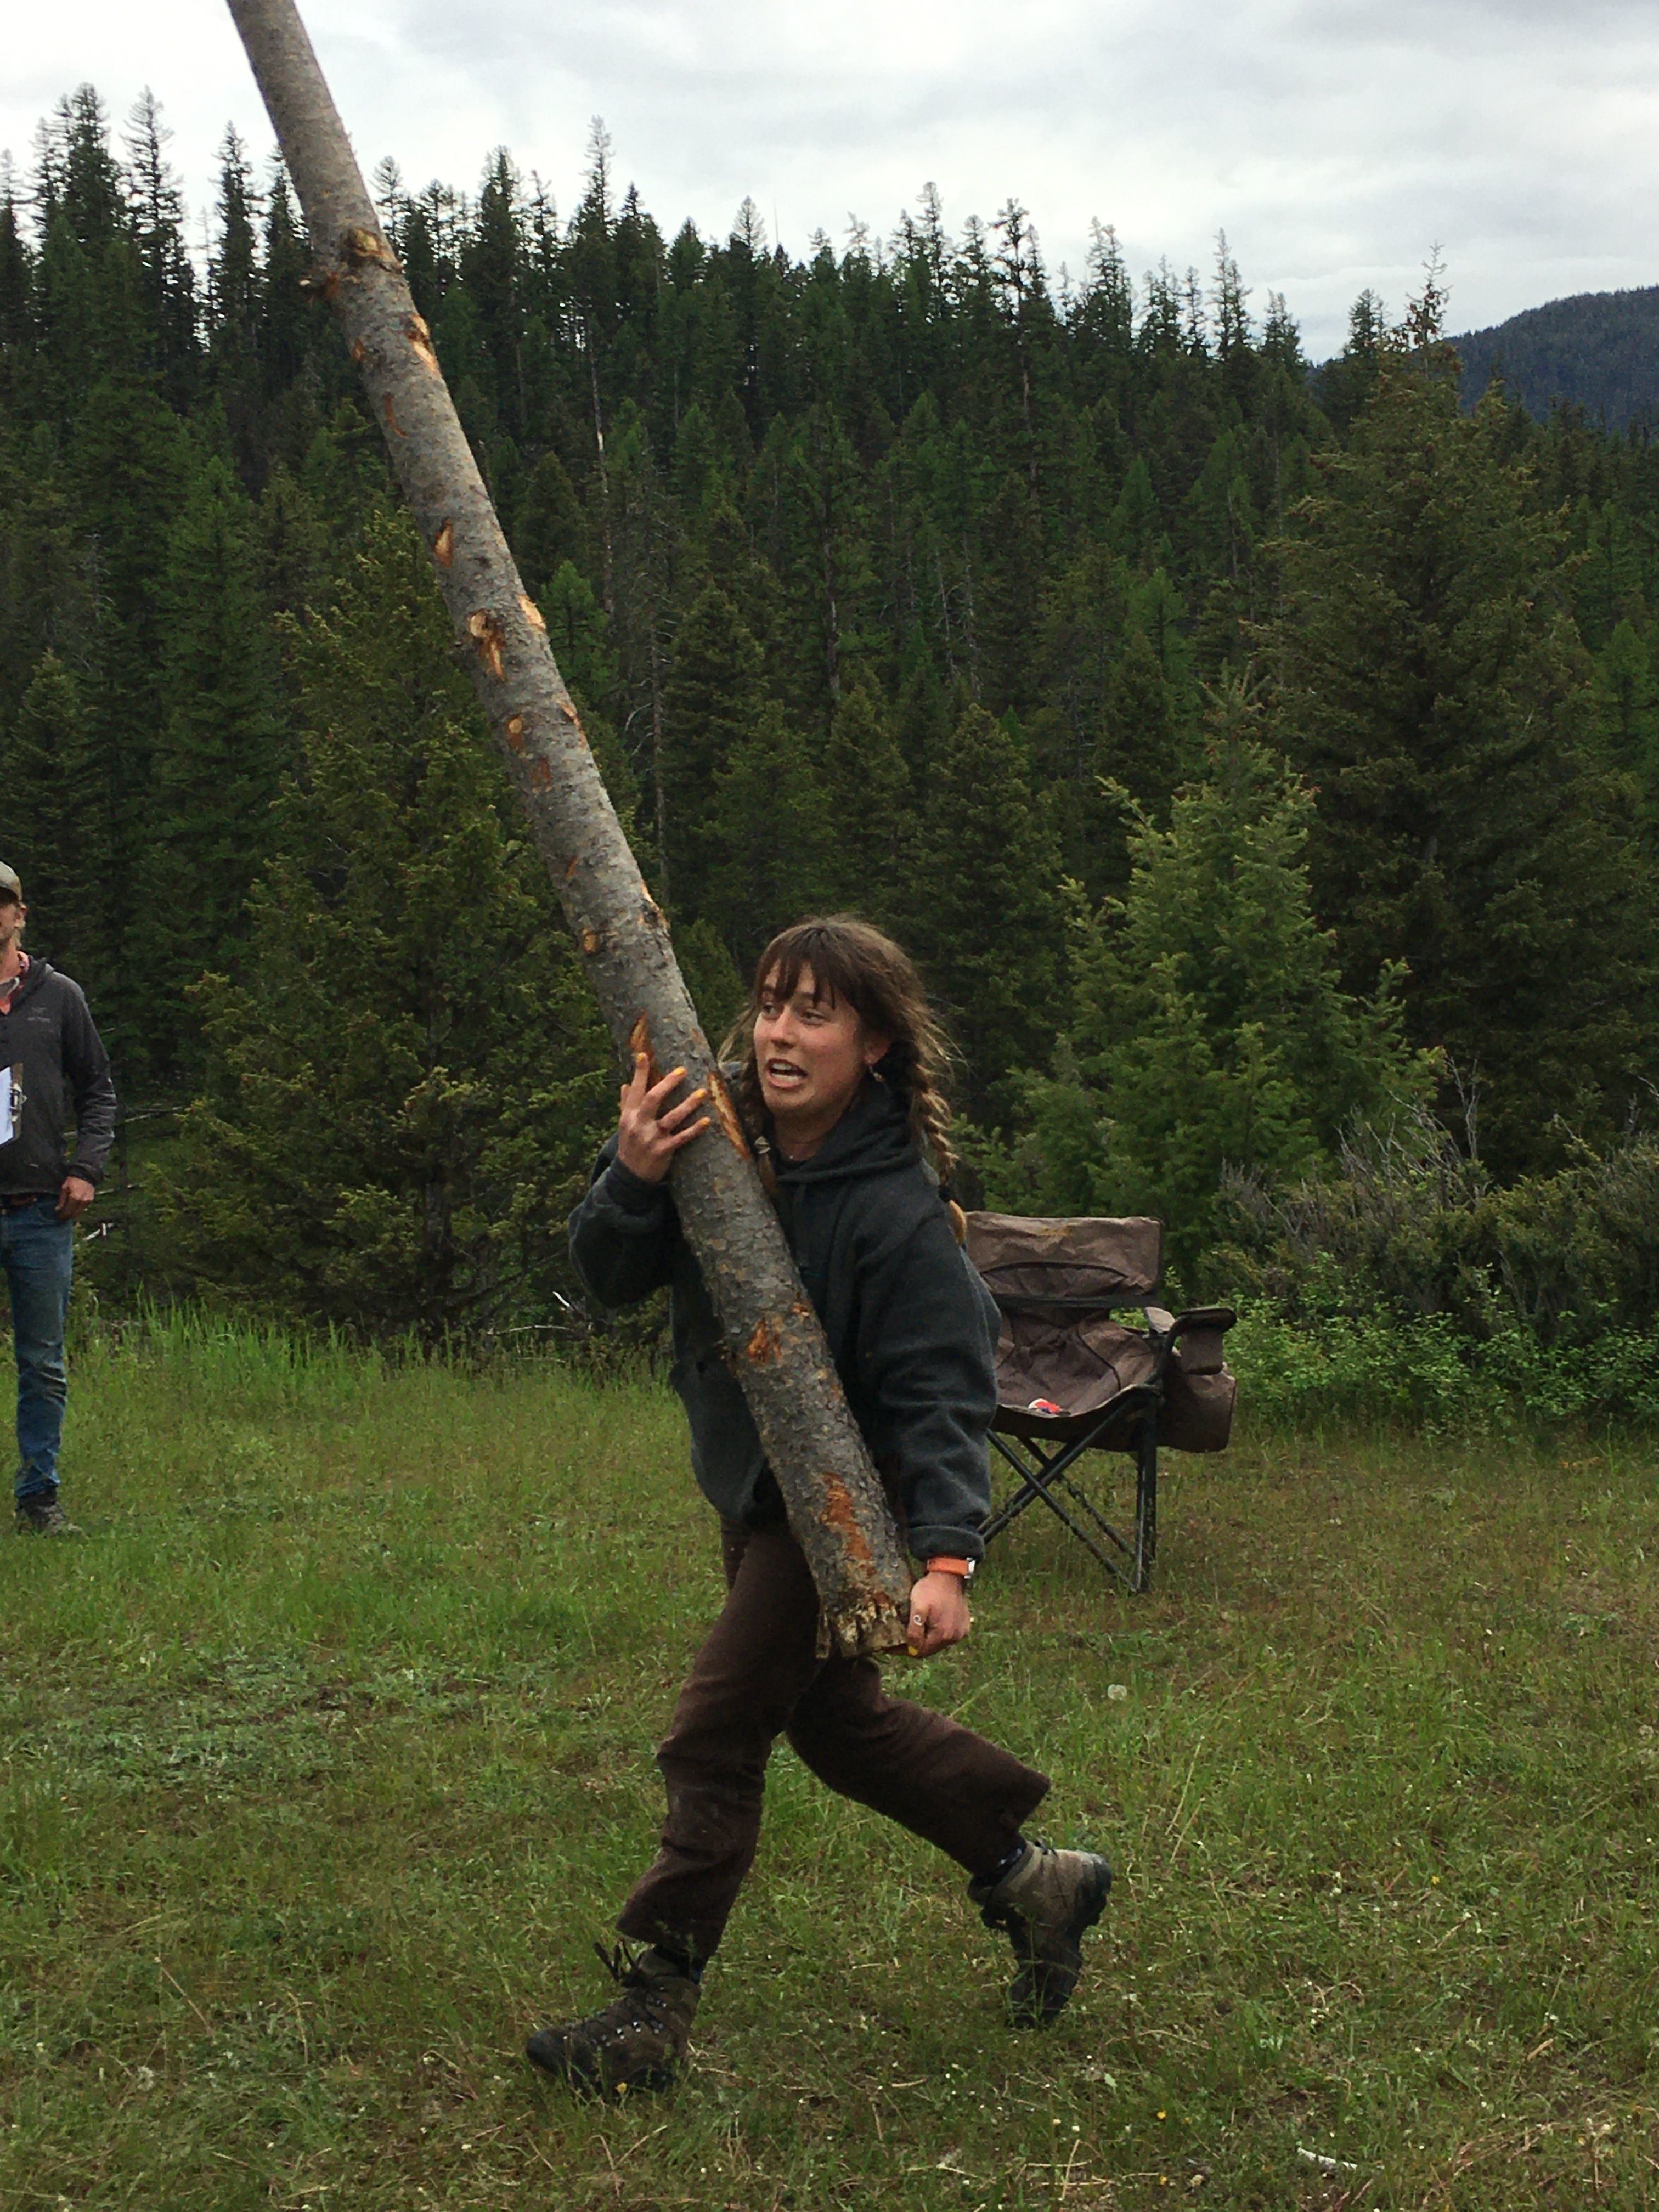 A crew member holds a large log vertically as they run. This is an example of one of the the athletic feats mentioned in the blog.